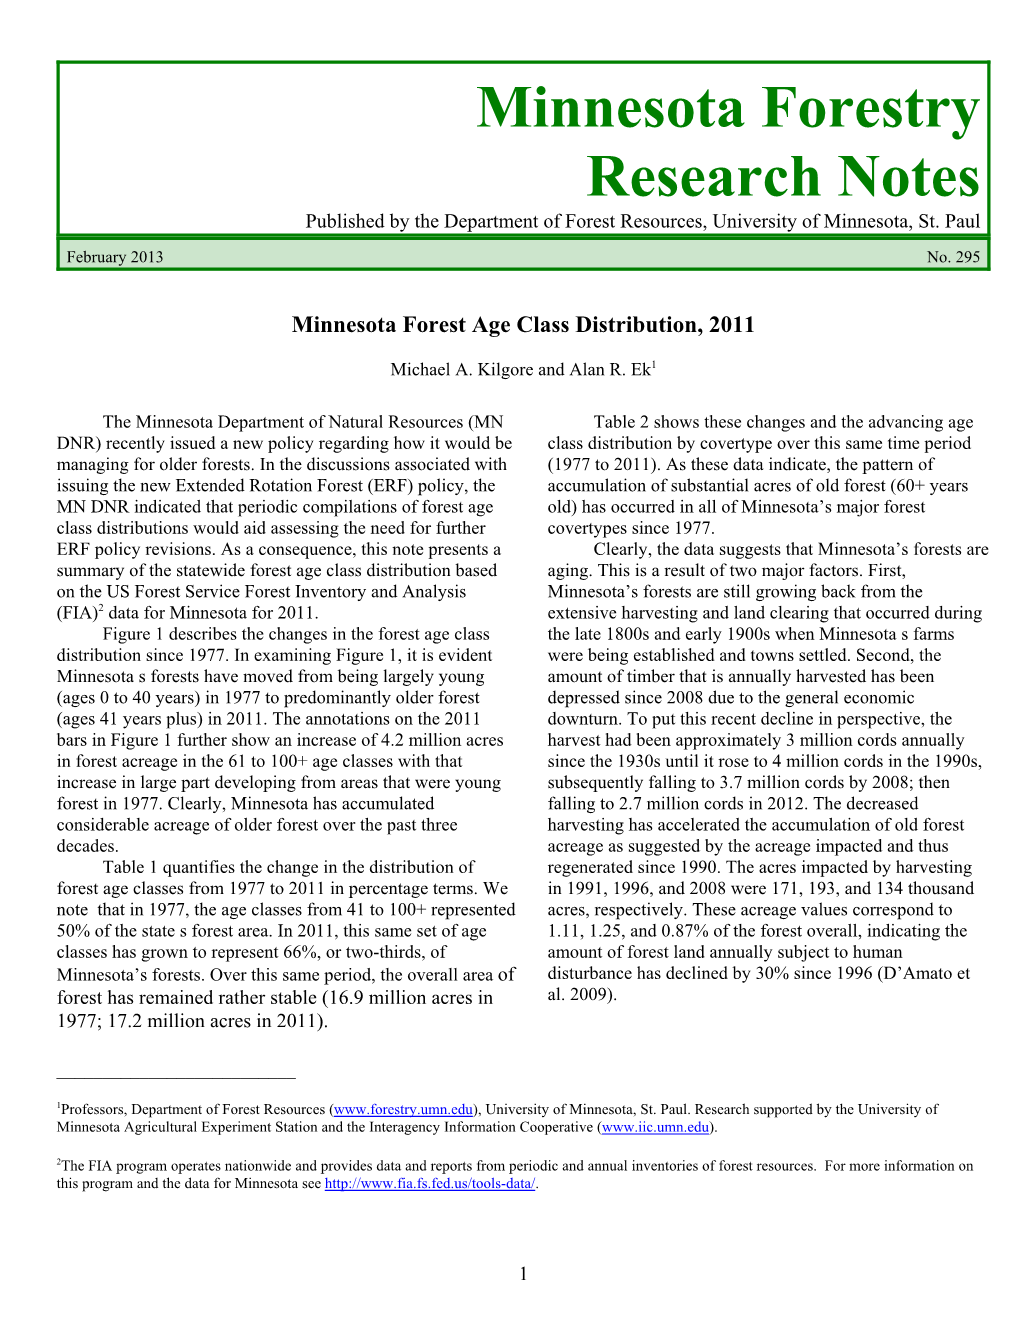 Minnesota Forestry Research Notes Published by the Department of Forest Resources, University of Minnesota, St